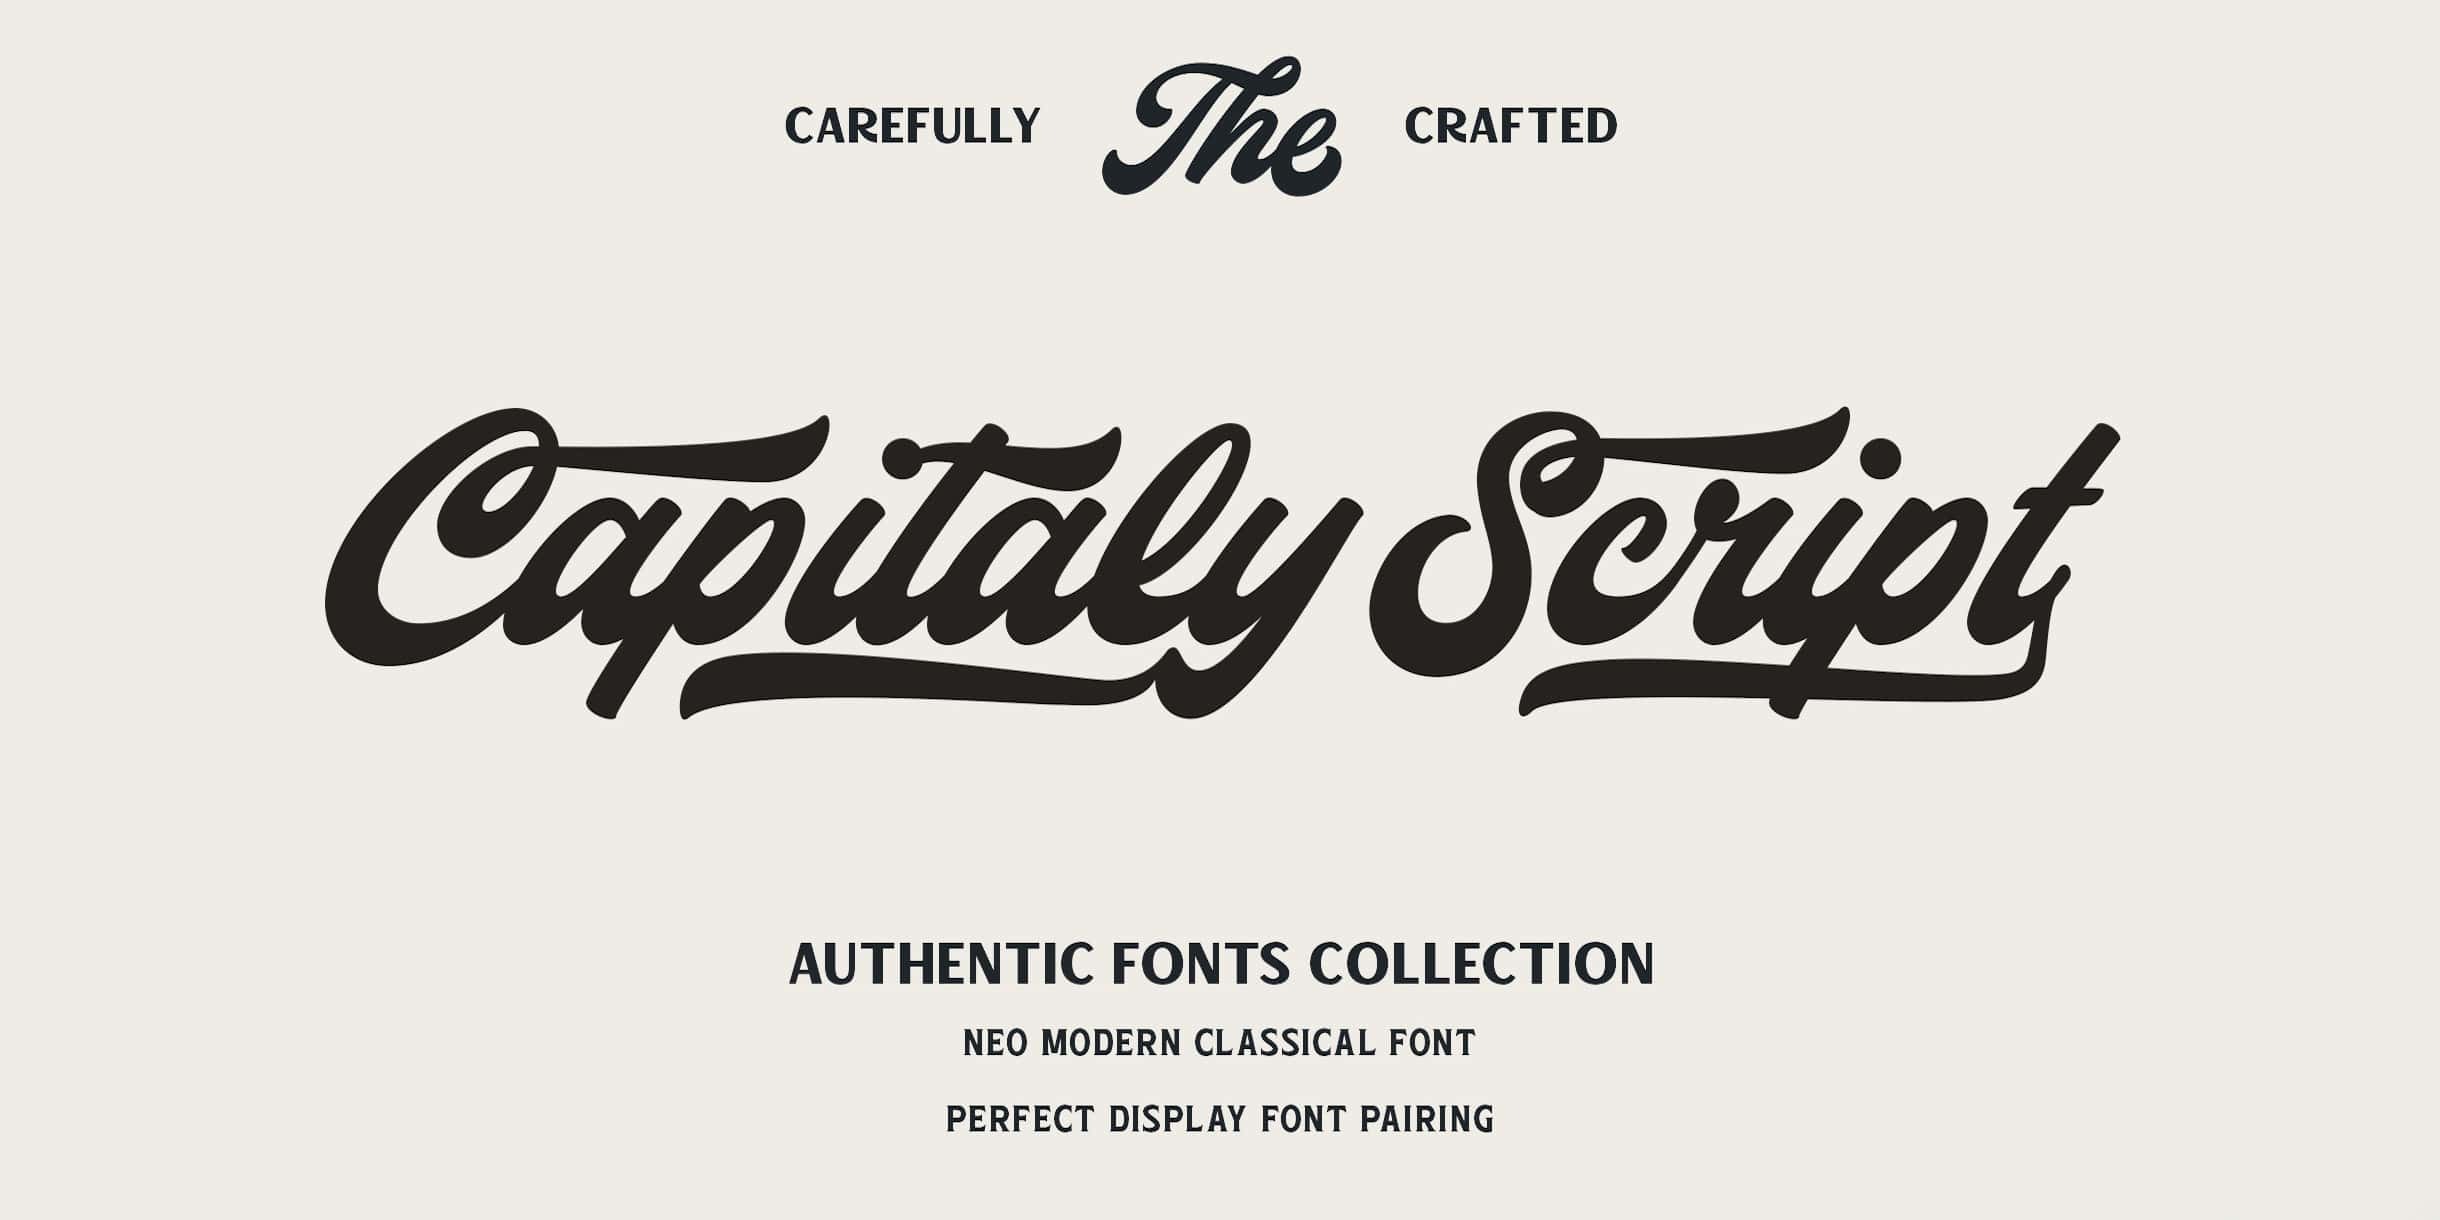 Preview and download Capitaly Script font